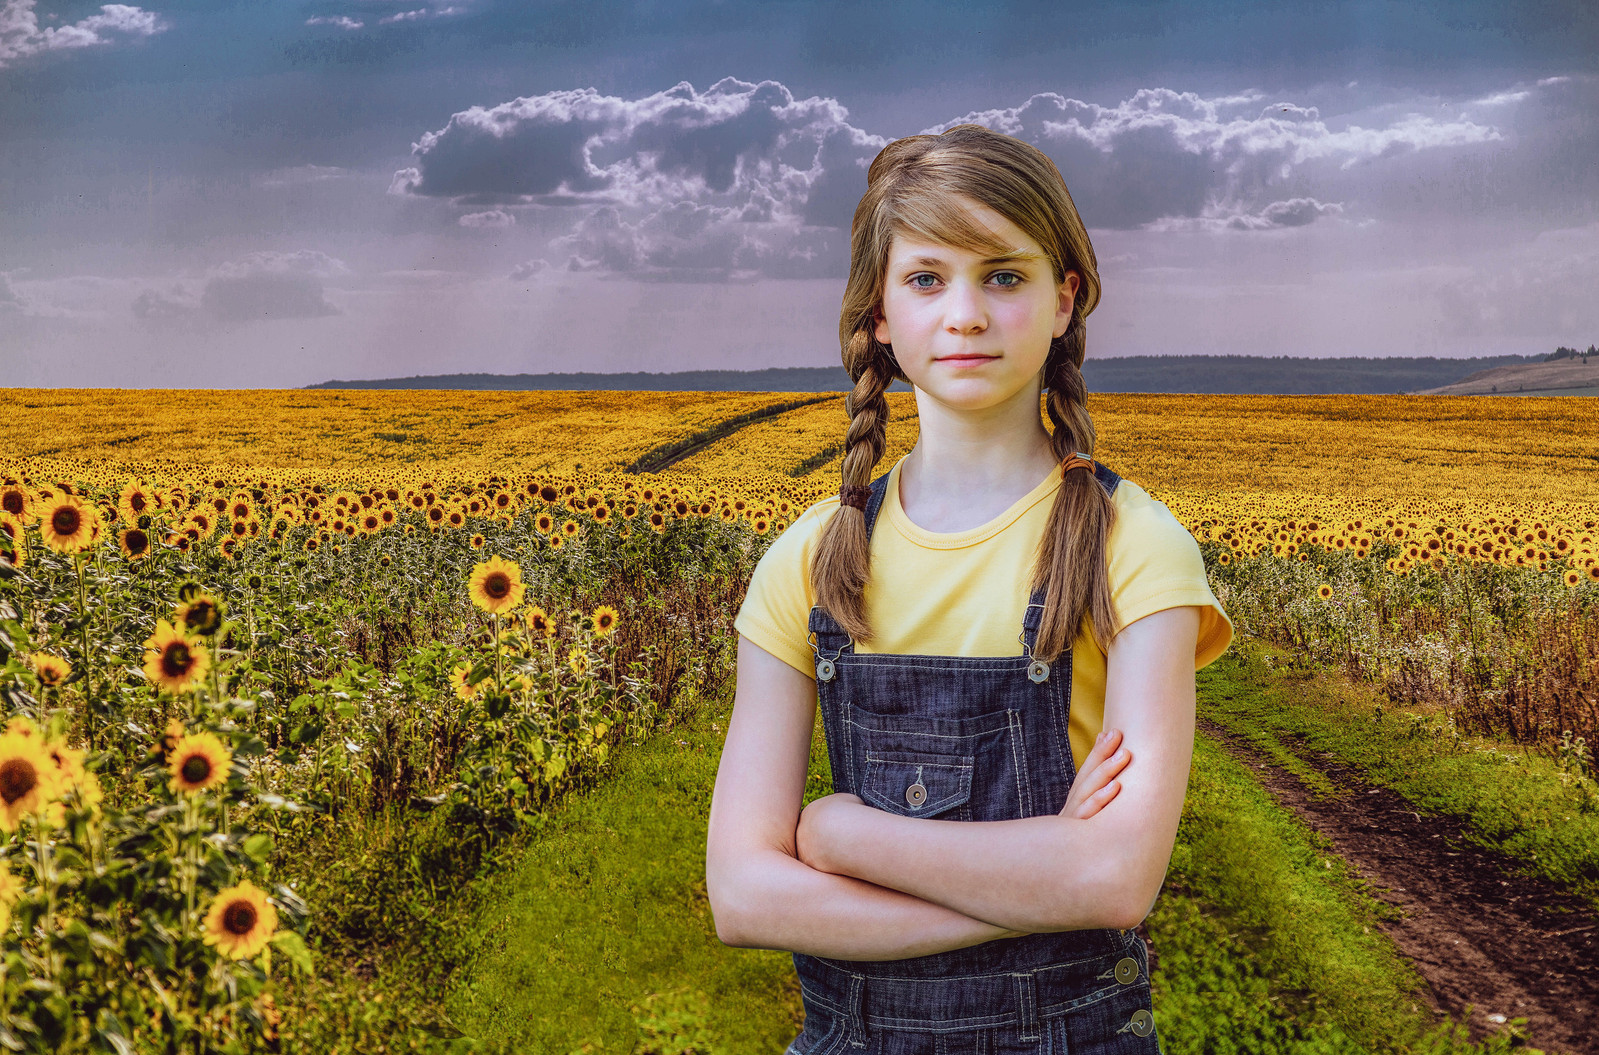 Creative Portraits using Photoshop and other editing software